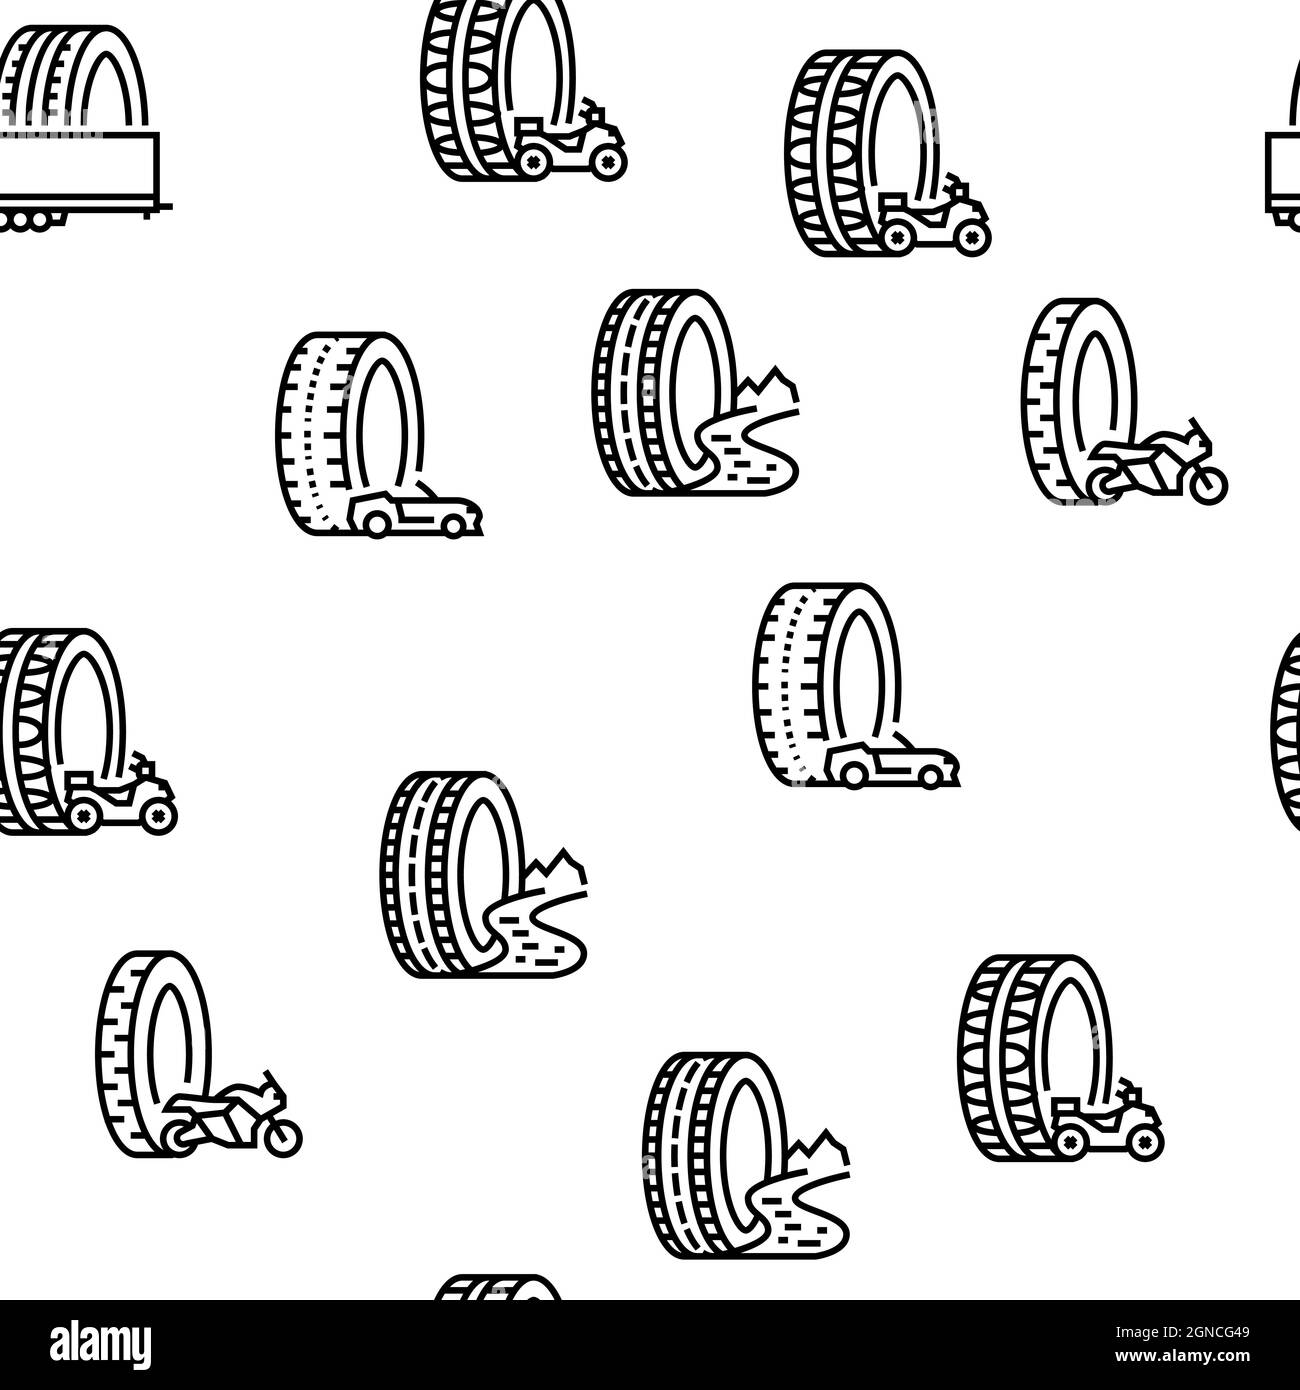 Used Tire Sale Shop Business Icons Set Vector Stock Vector